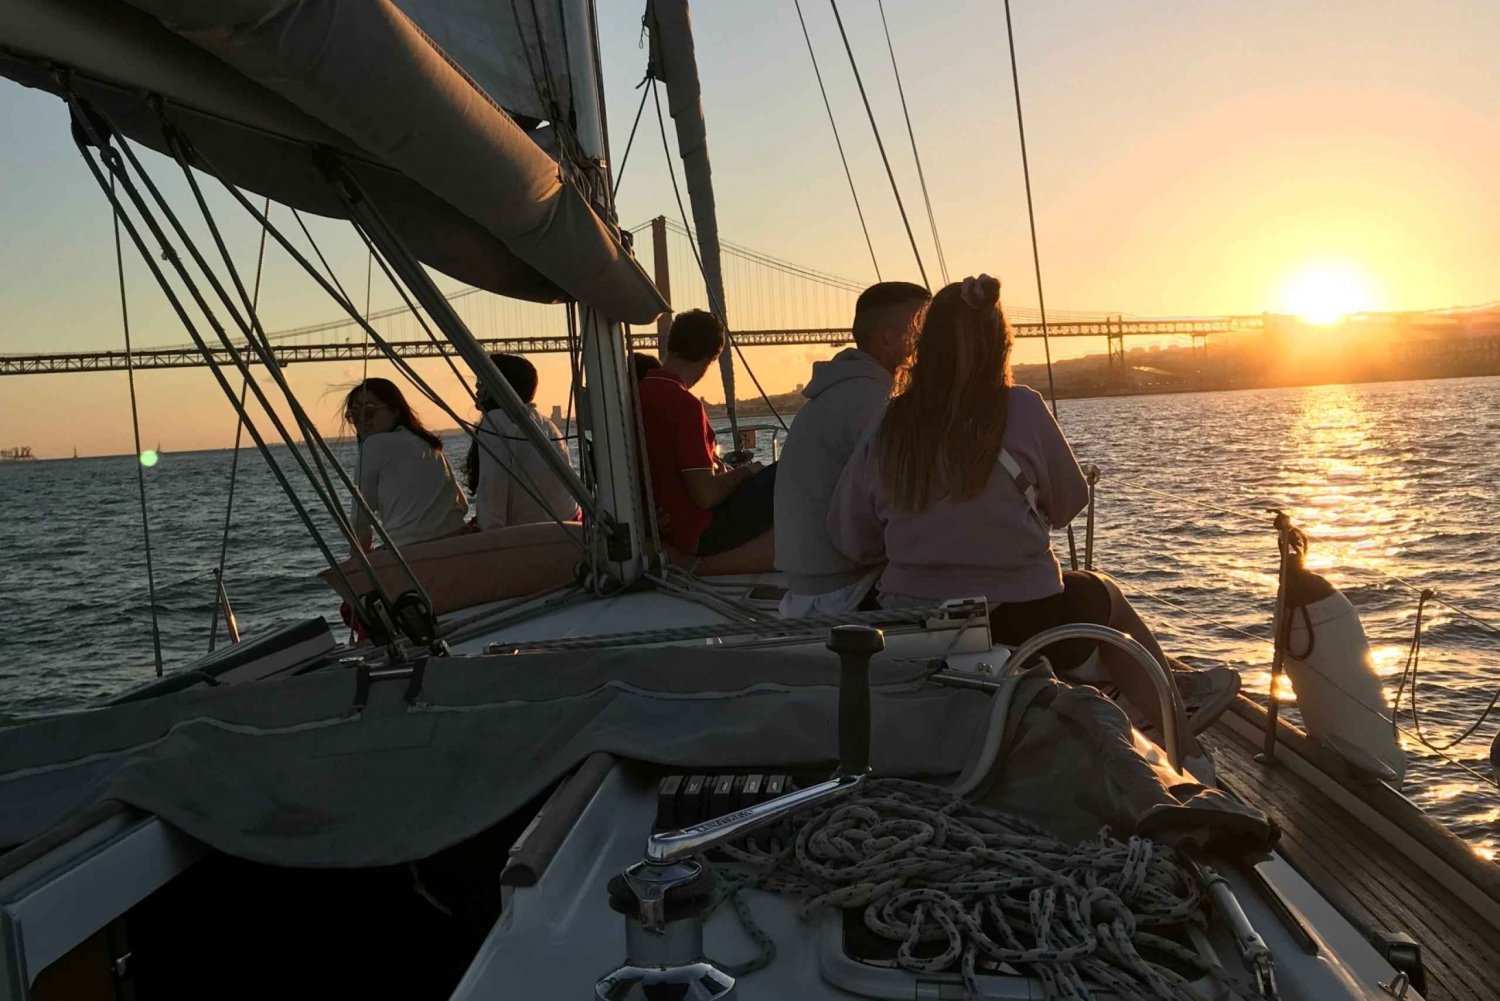 Lisbon: Sailing with history and wine